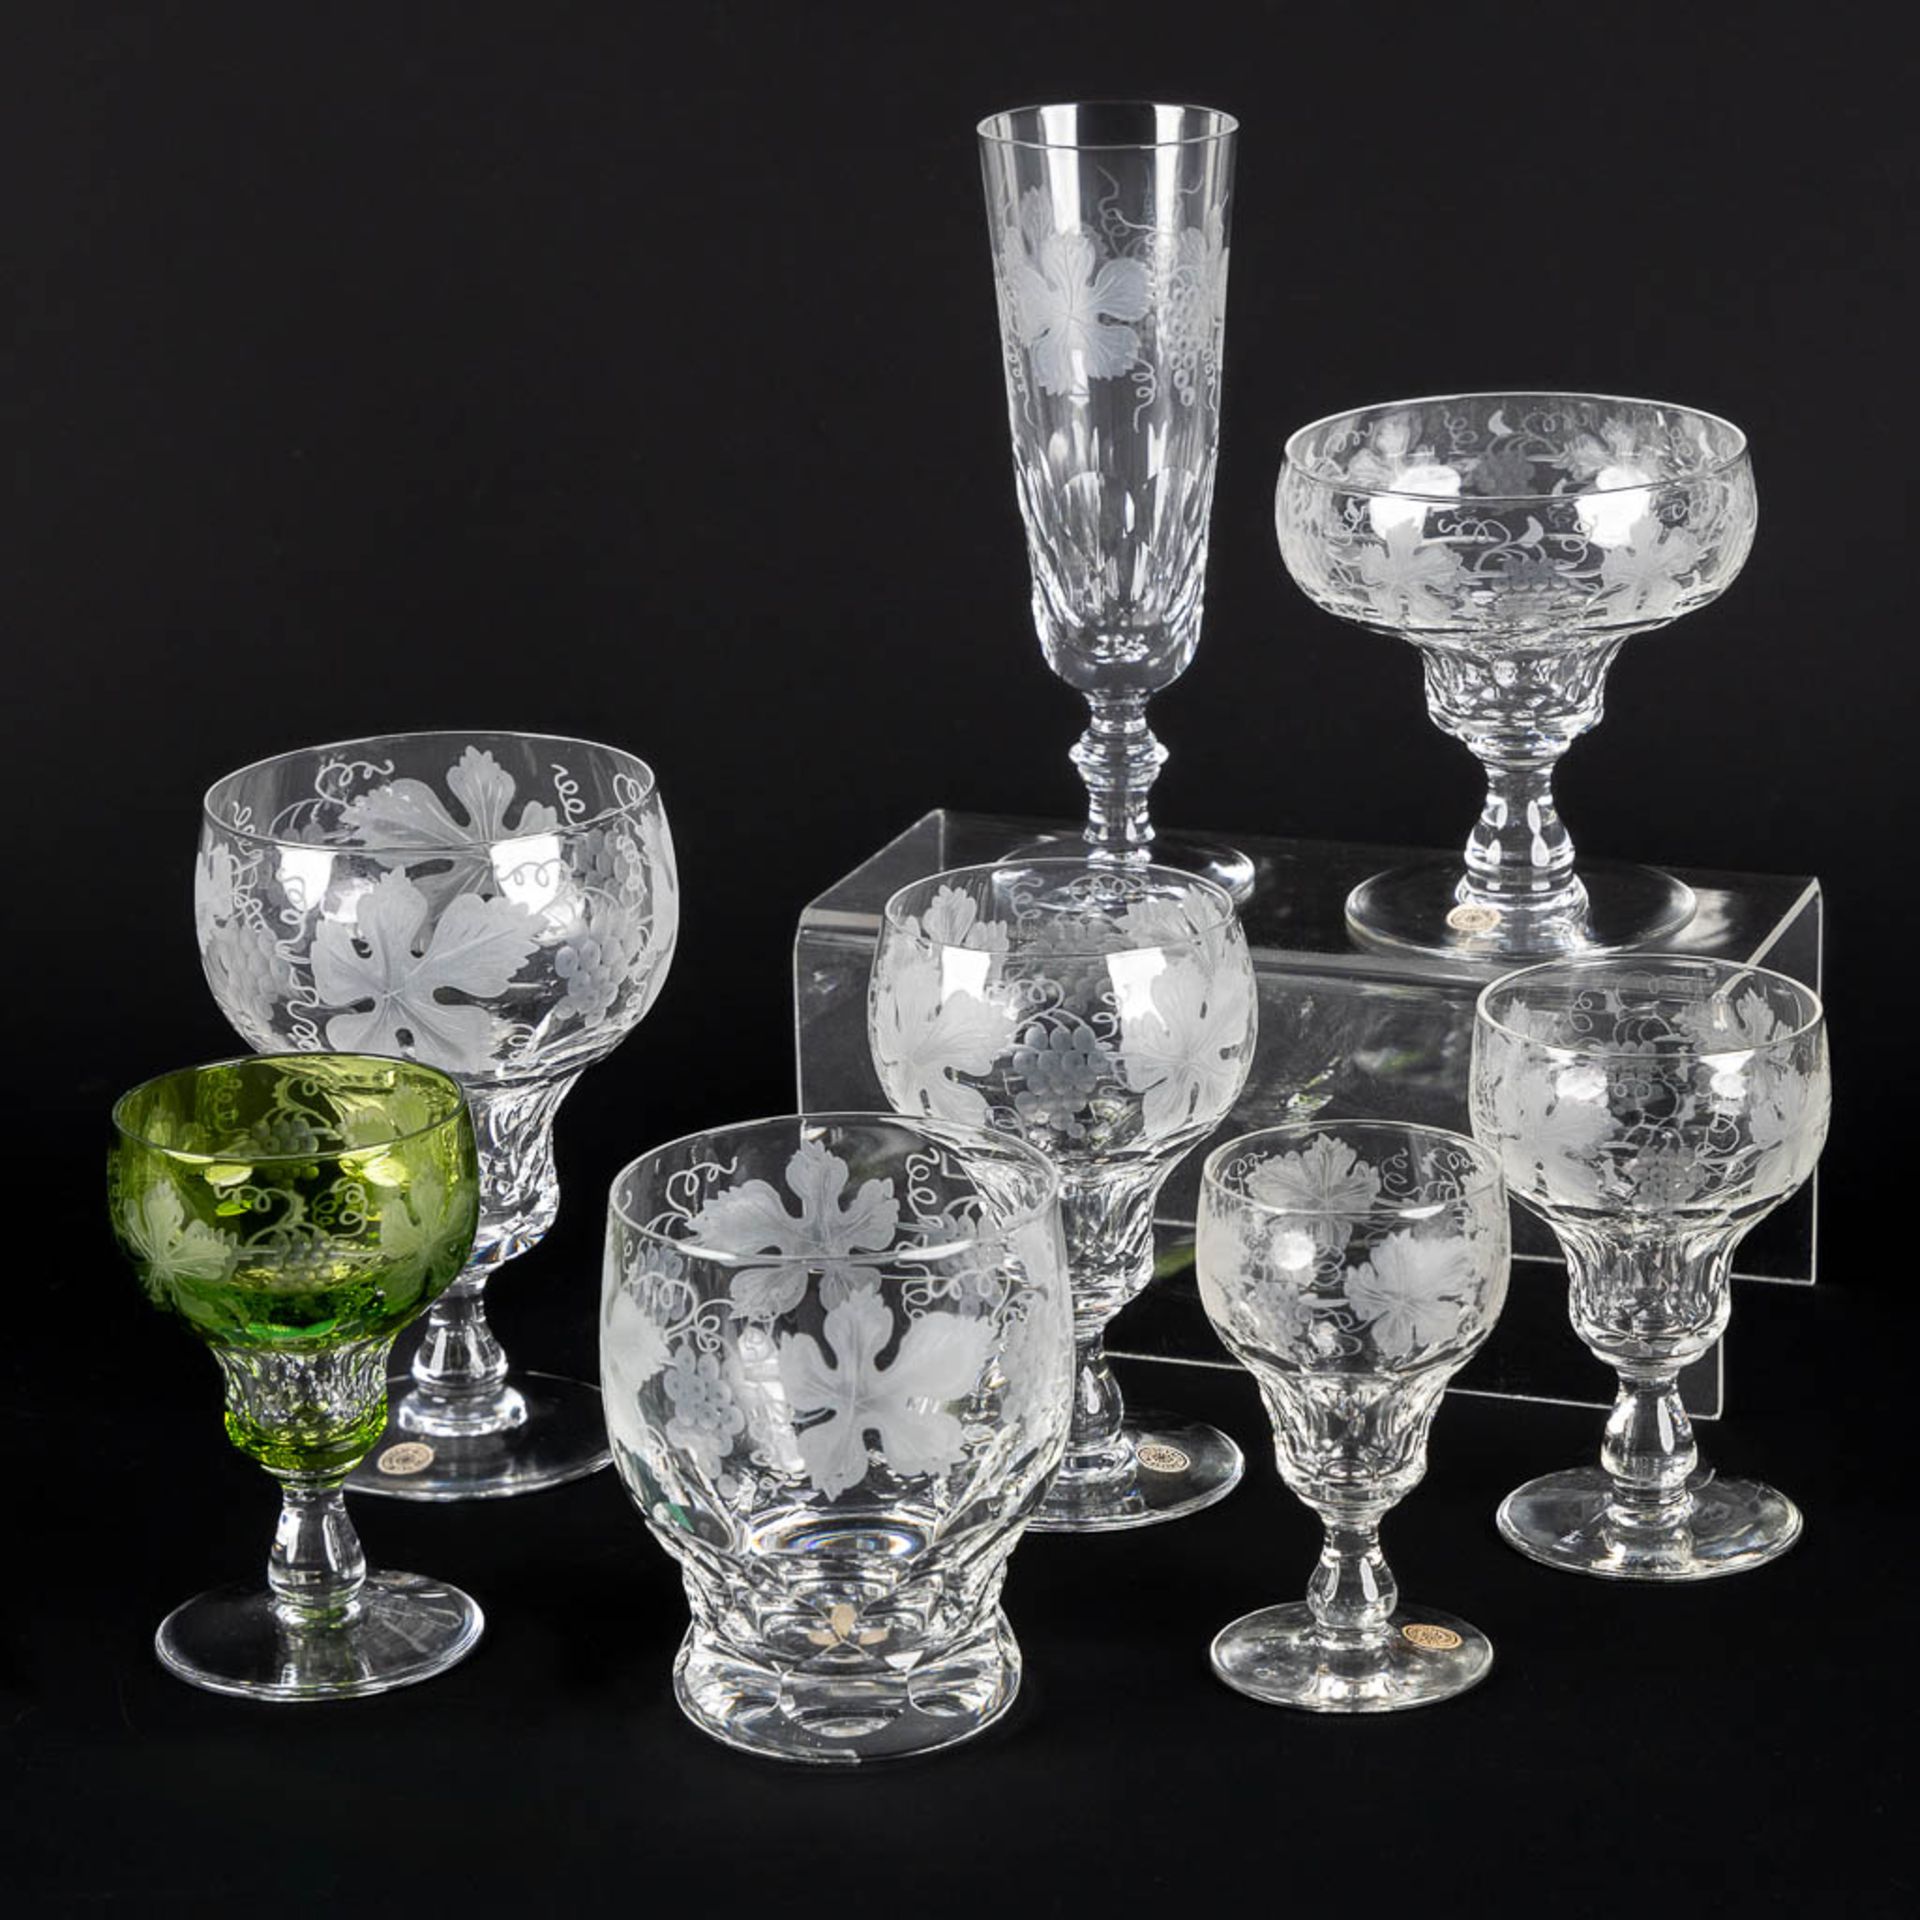 Val Saint Lambert, a large glass service decorated with grapes and vines. 108 pieces. (H:16,3 cm)